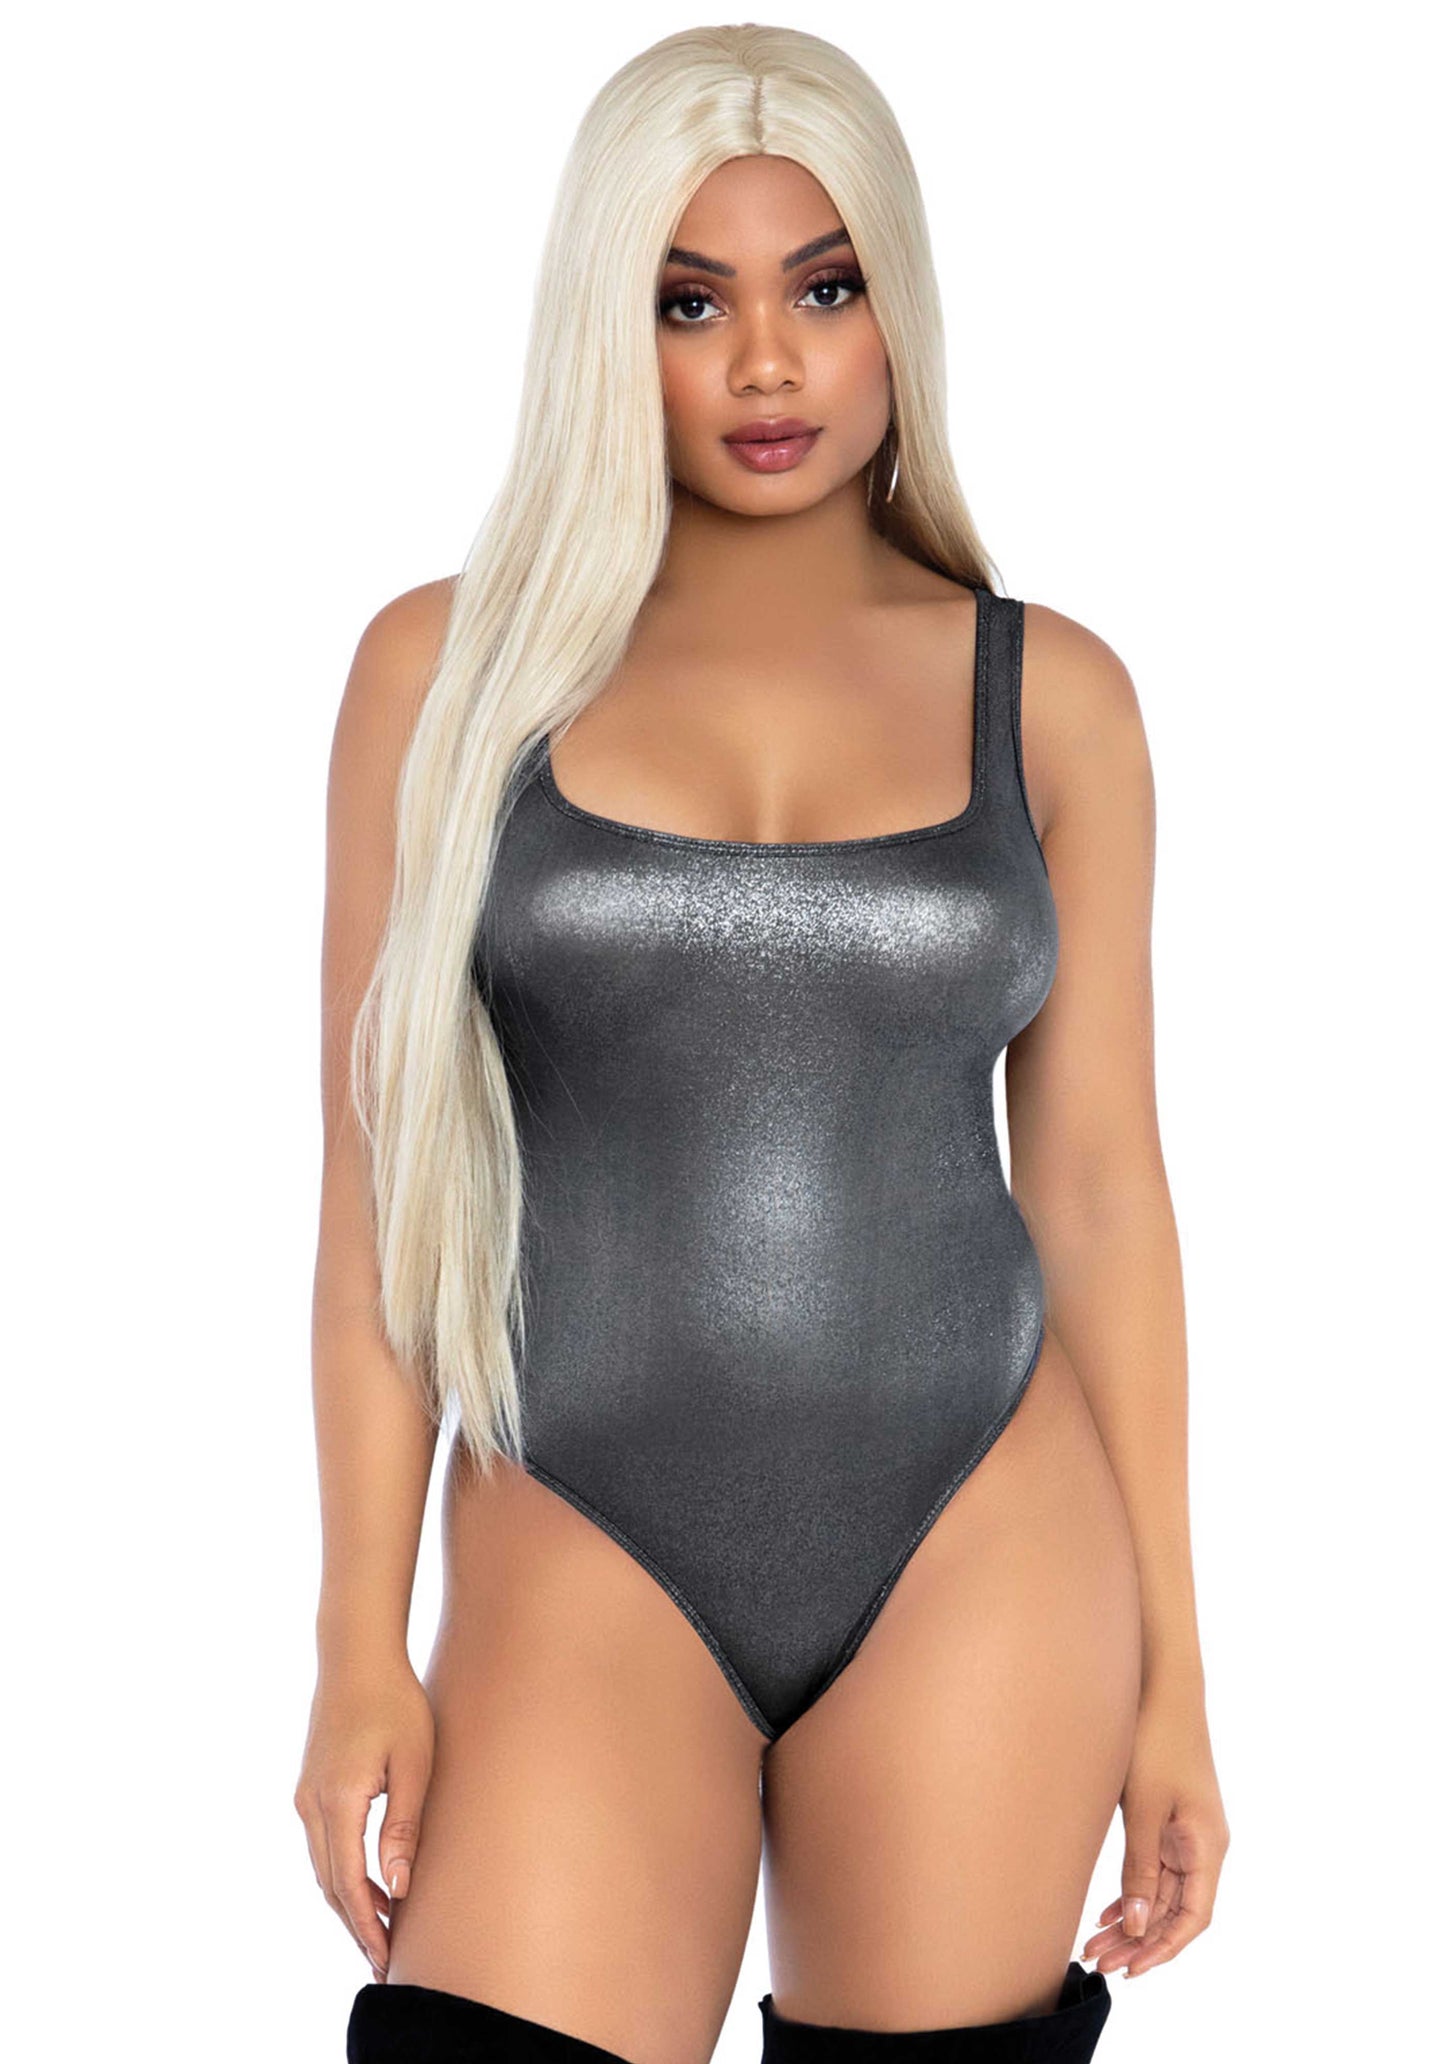 Leg Avenue 89265 Metallic Bodysuit - Black sleeveless tank body-top with an all over metallic silver micro dot print, thong back and snap fastener closures.